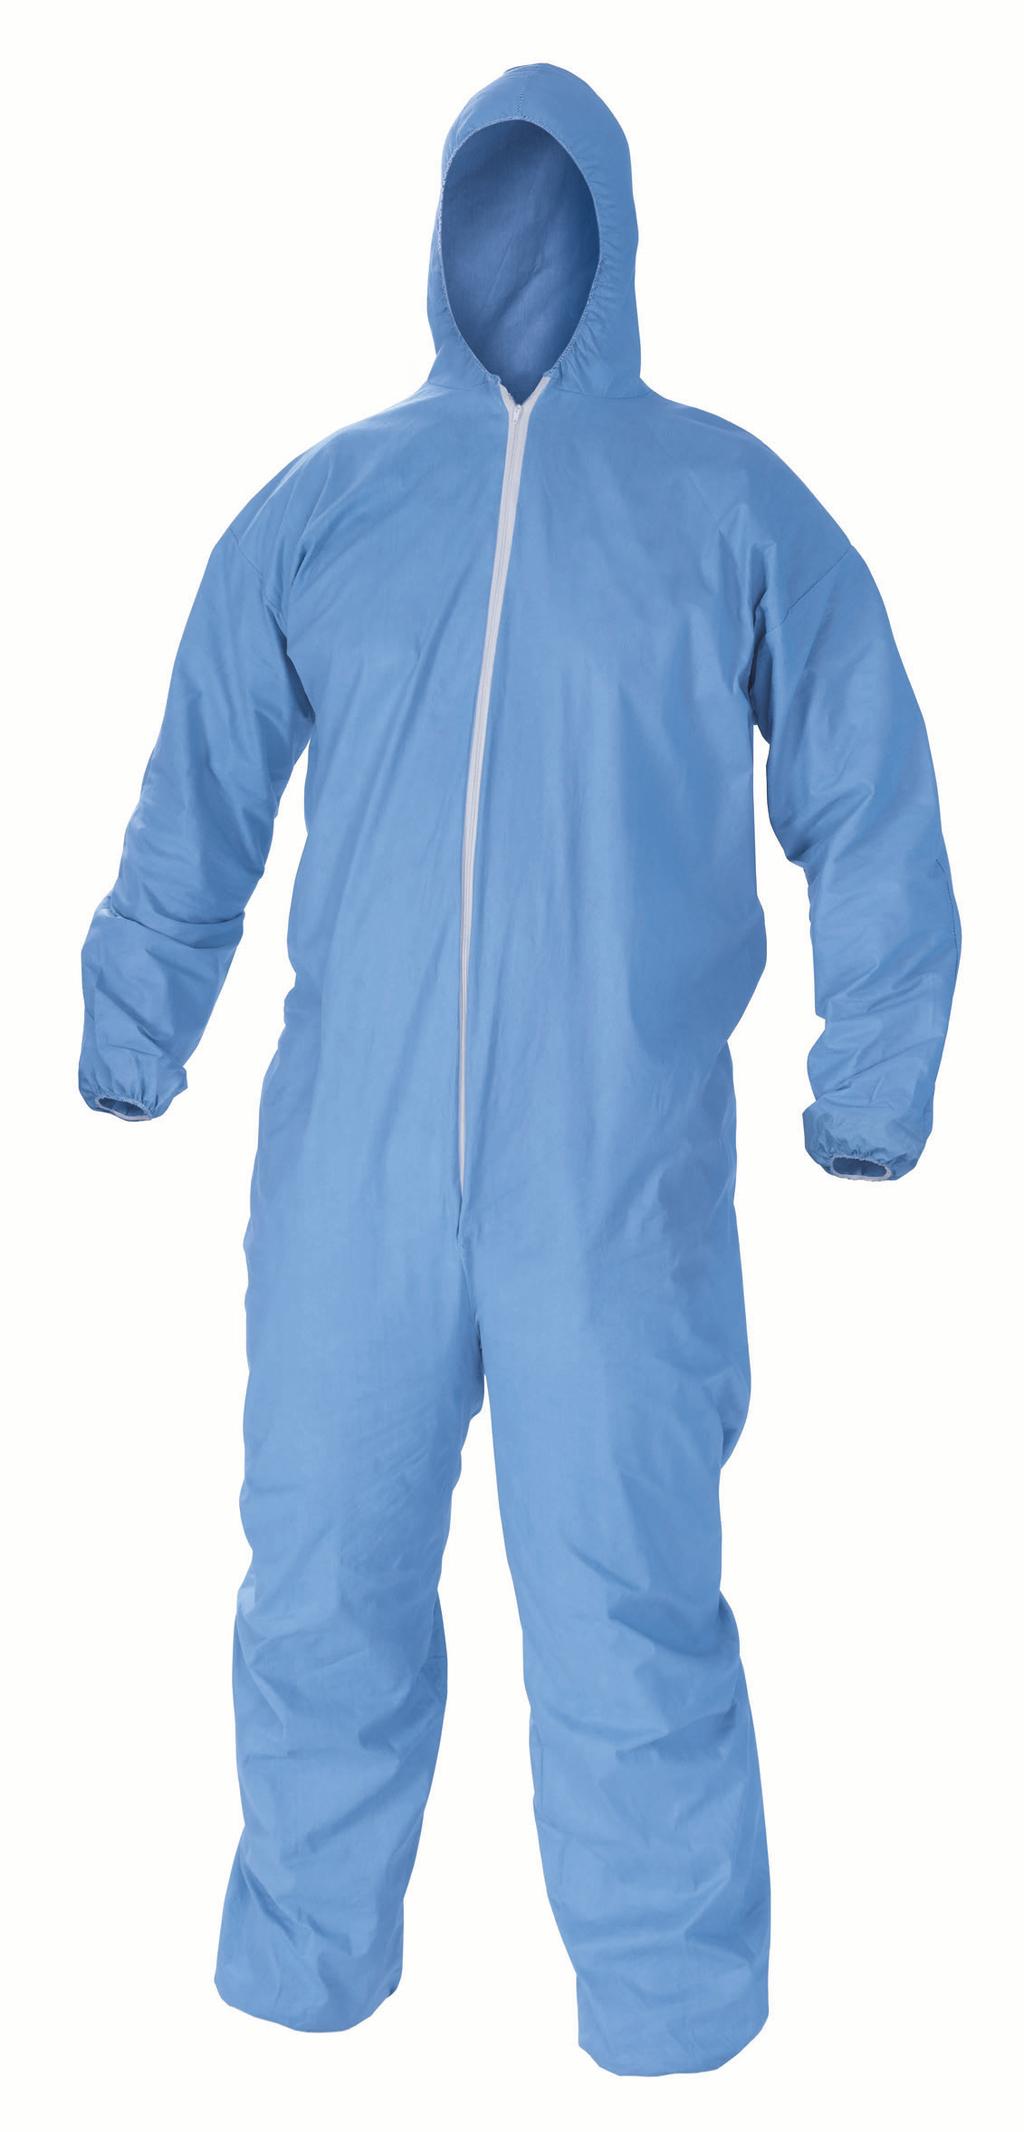 A65 Flame Resistant Apparel KEENGUARD* A65 Blue Coveralls Zipper Front Ankles & Hood Typical Uses 45312 Welding 45313 Oil refining 45314 X 45315 2X 45316 3X 45317 4X 3 5X 317 6X 45322 45323 453 X 453